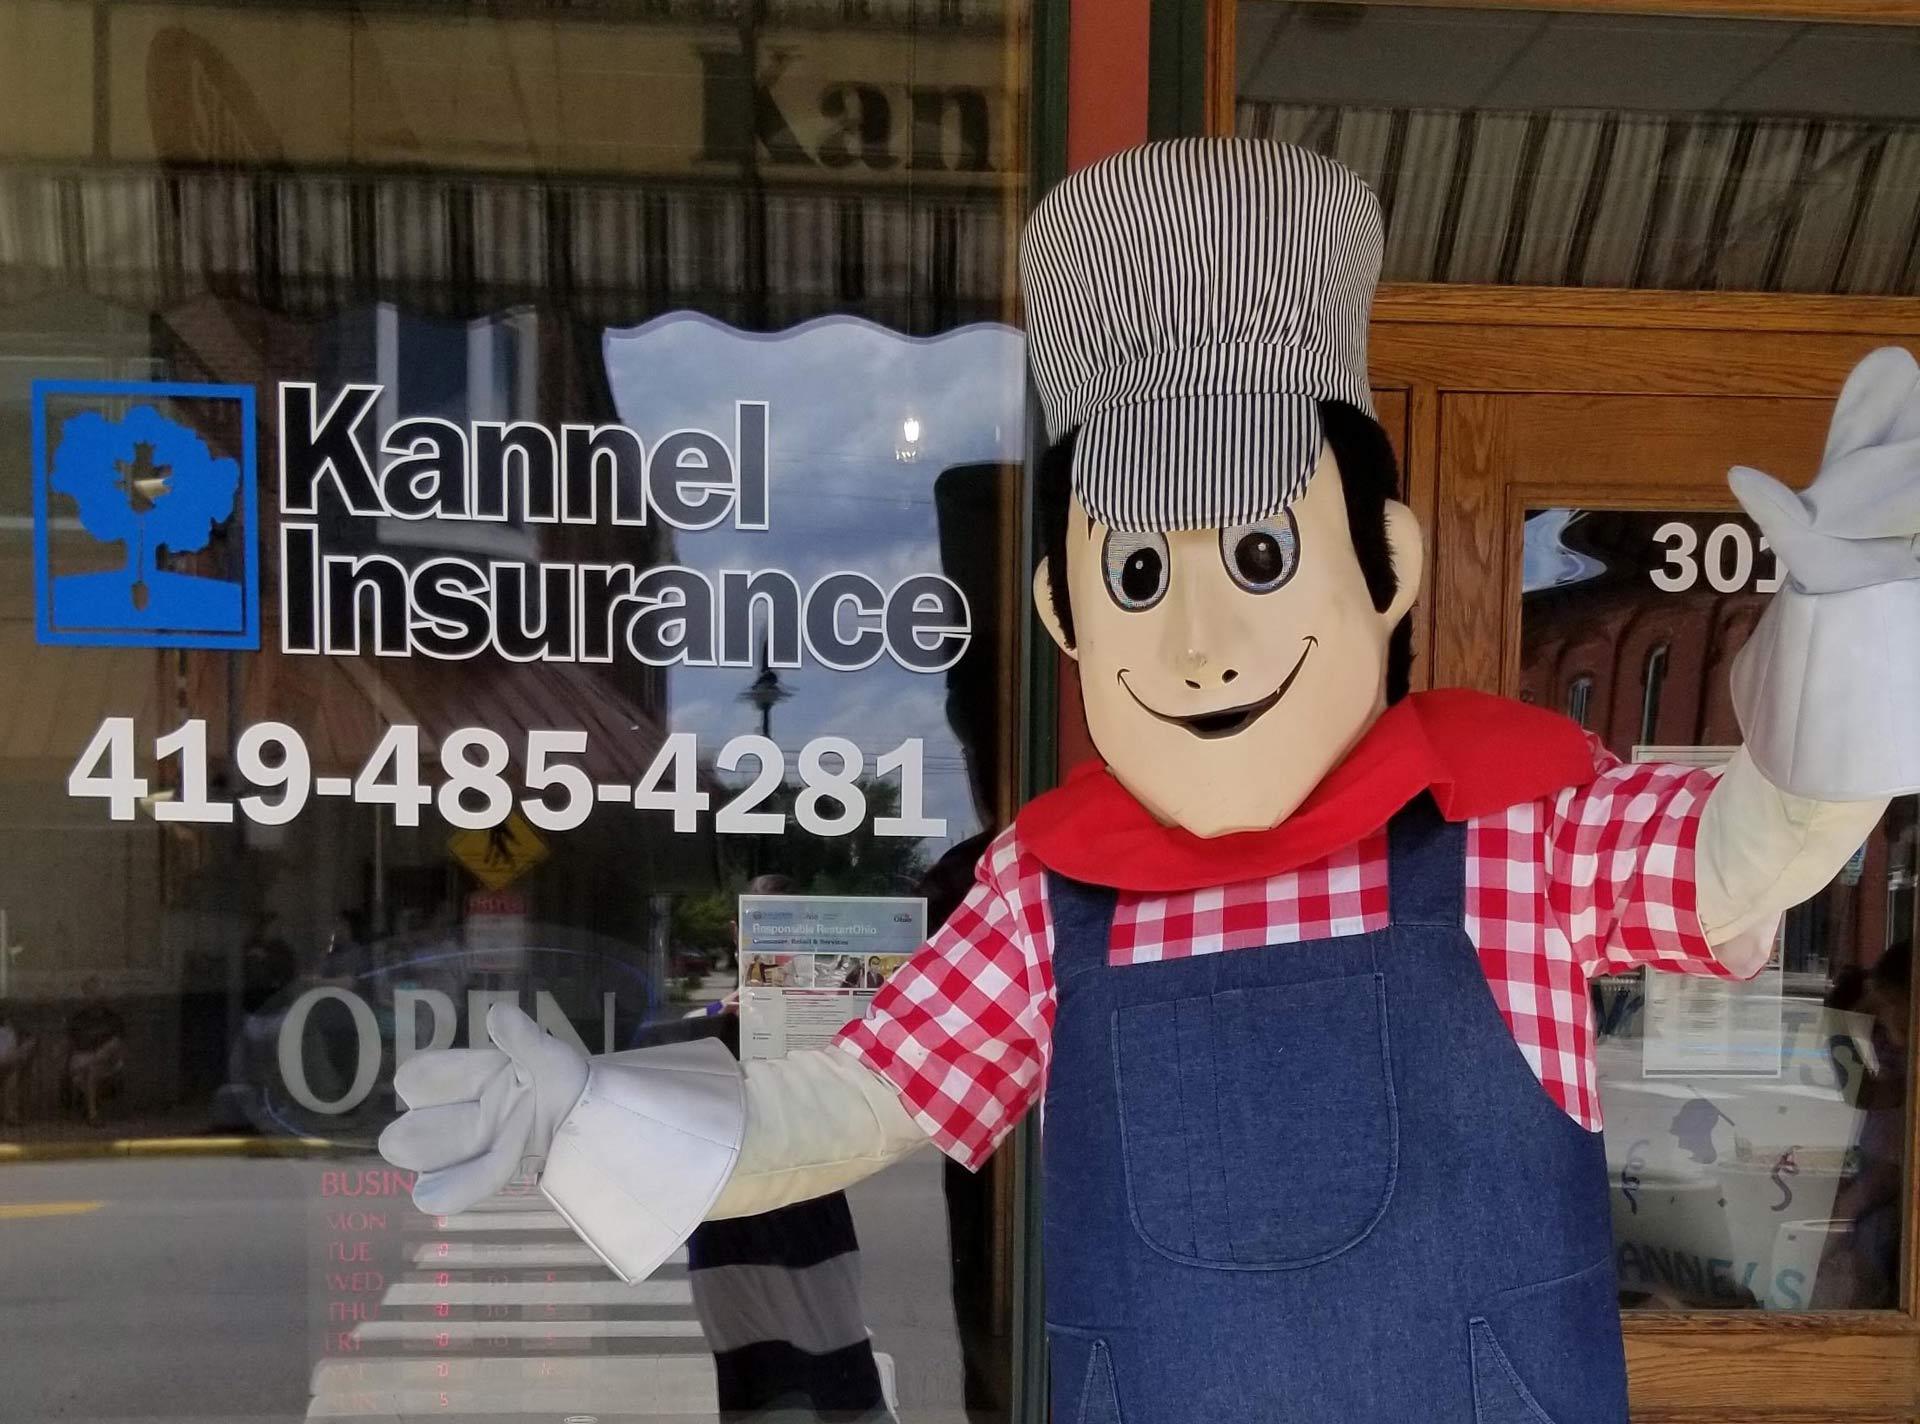 kannel insurance mascot in front of window sign montpelier oh